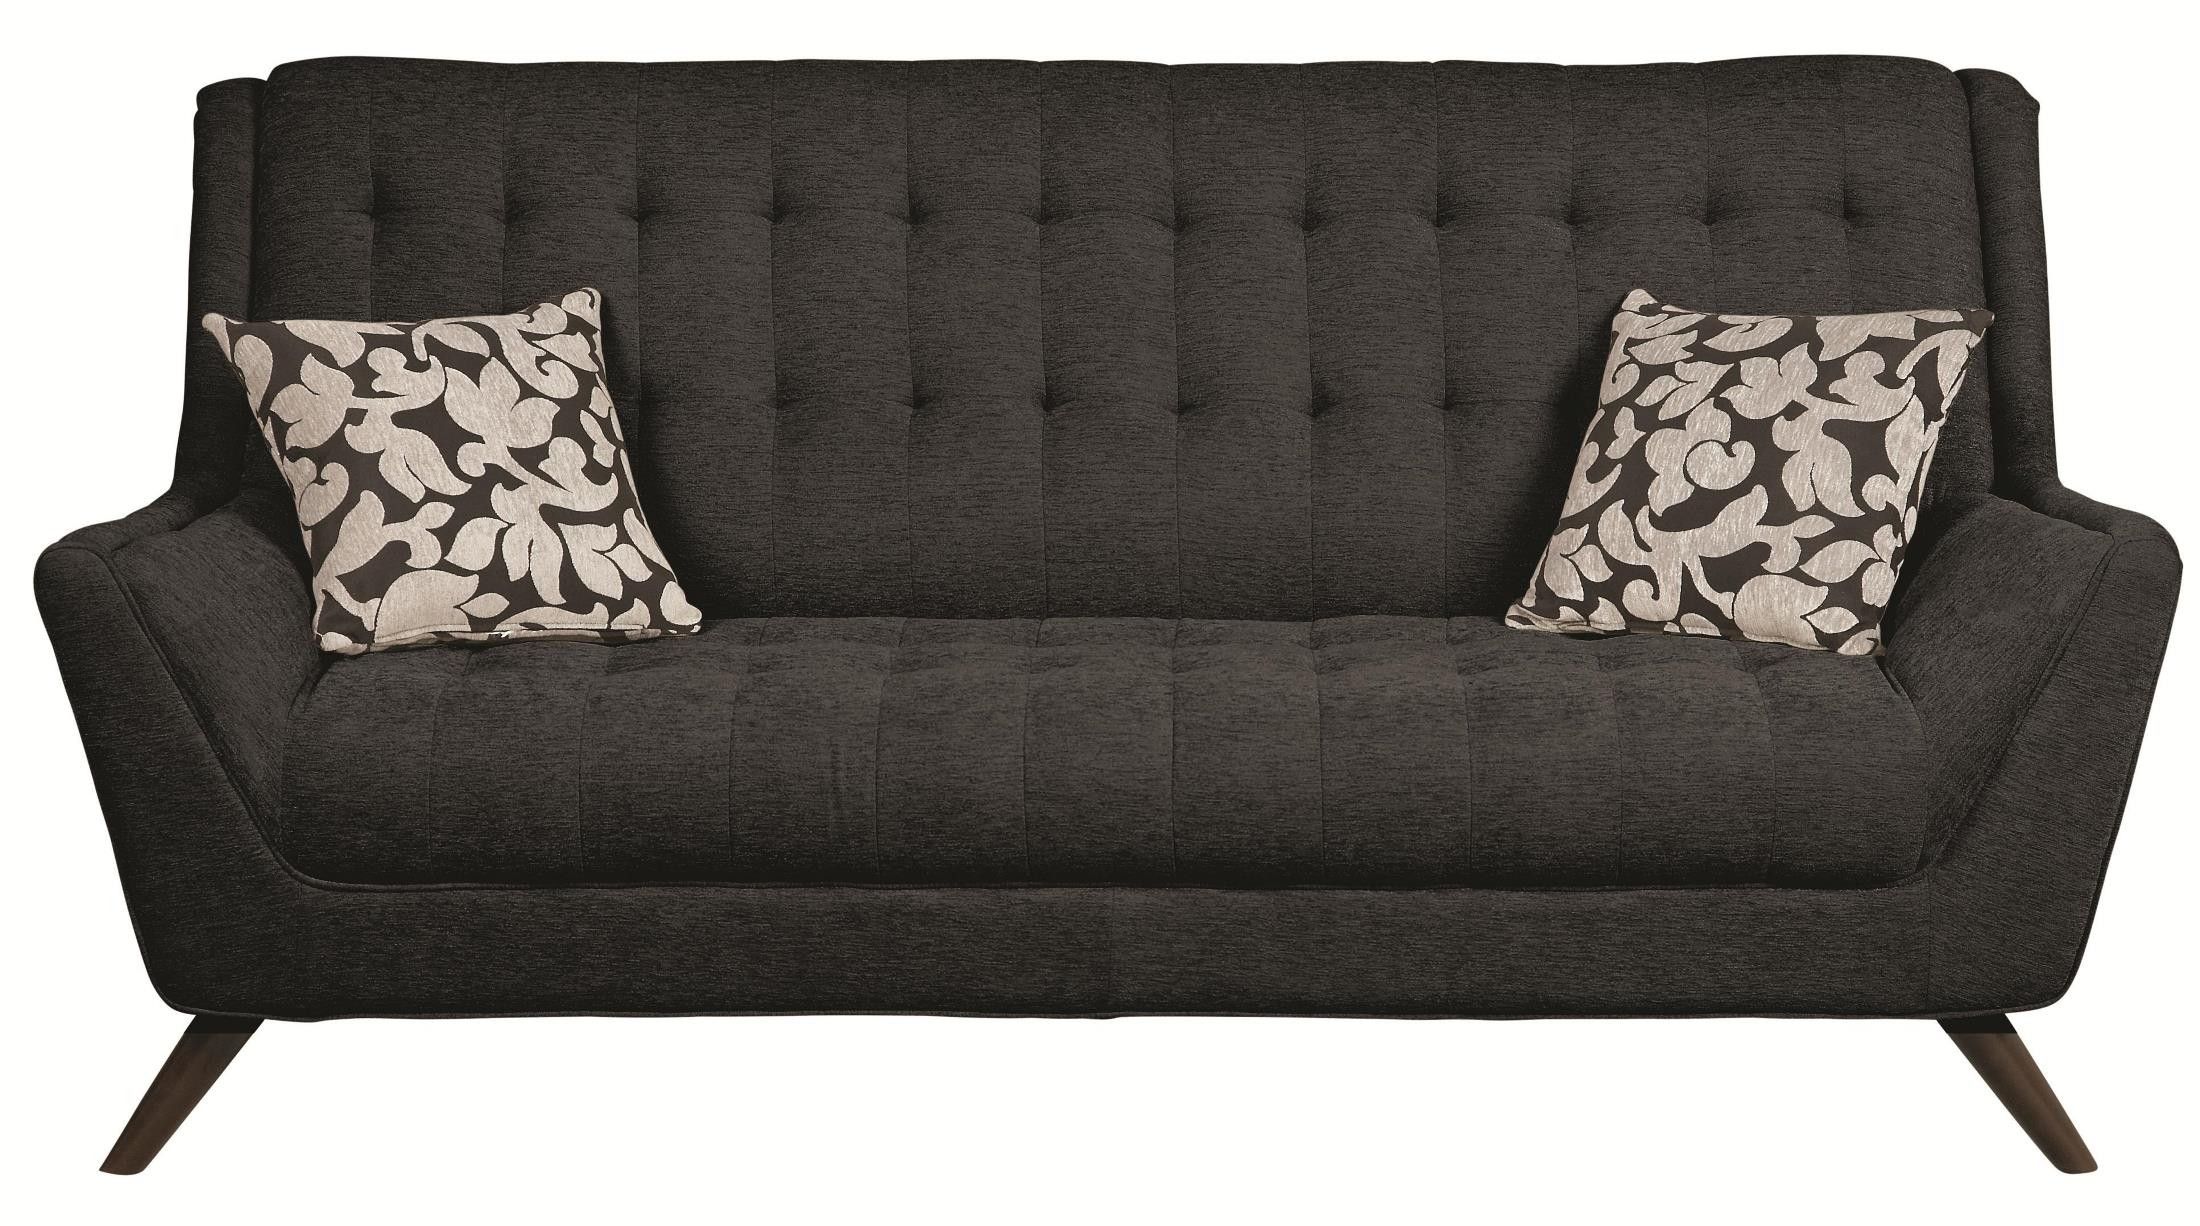 Natalia Black Sofa From Coaster (503774) | Coleman Furniture With Traditional Black Fabric Sofas (View 16 of 21)